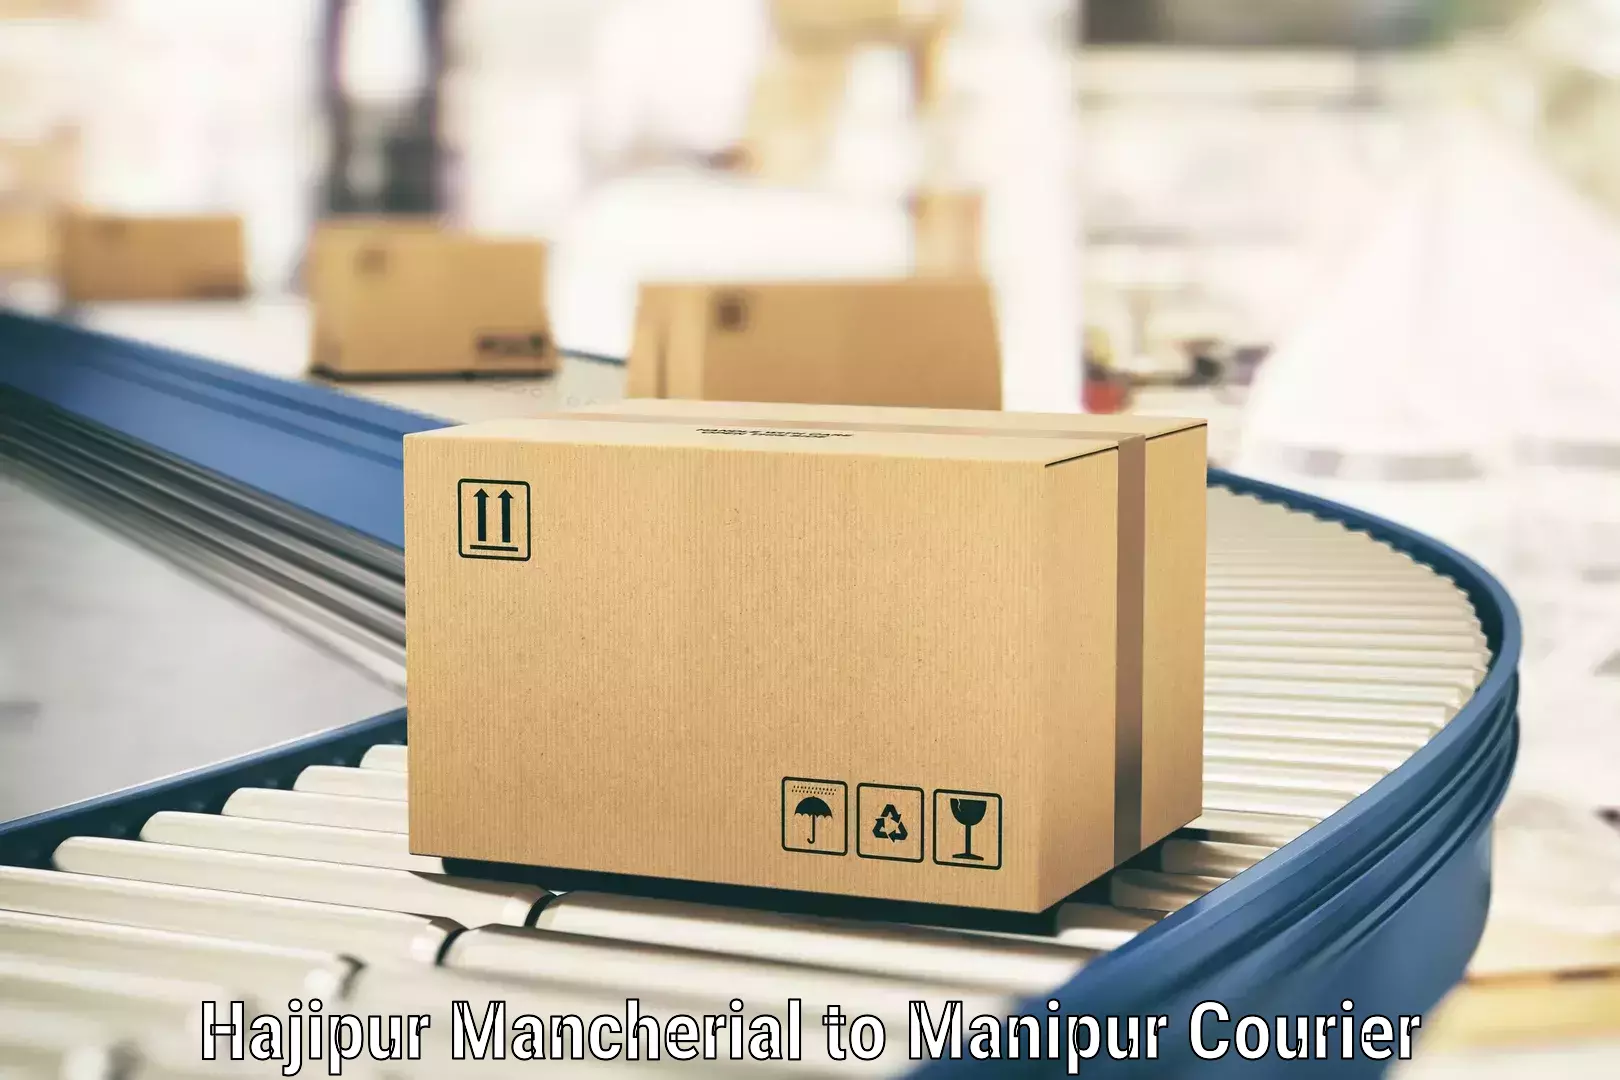 Business logistics support Hajipur Mancherial to Imphal